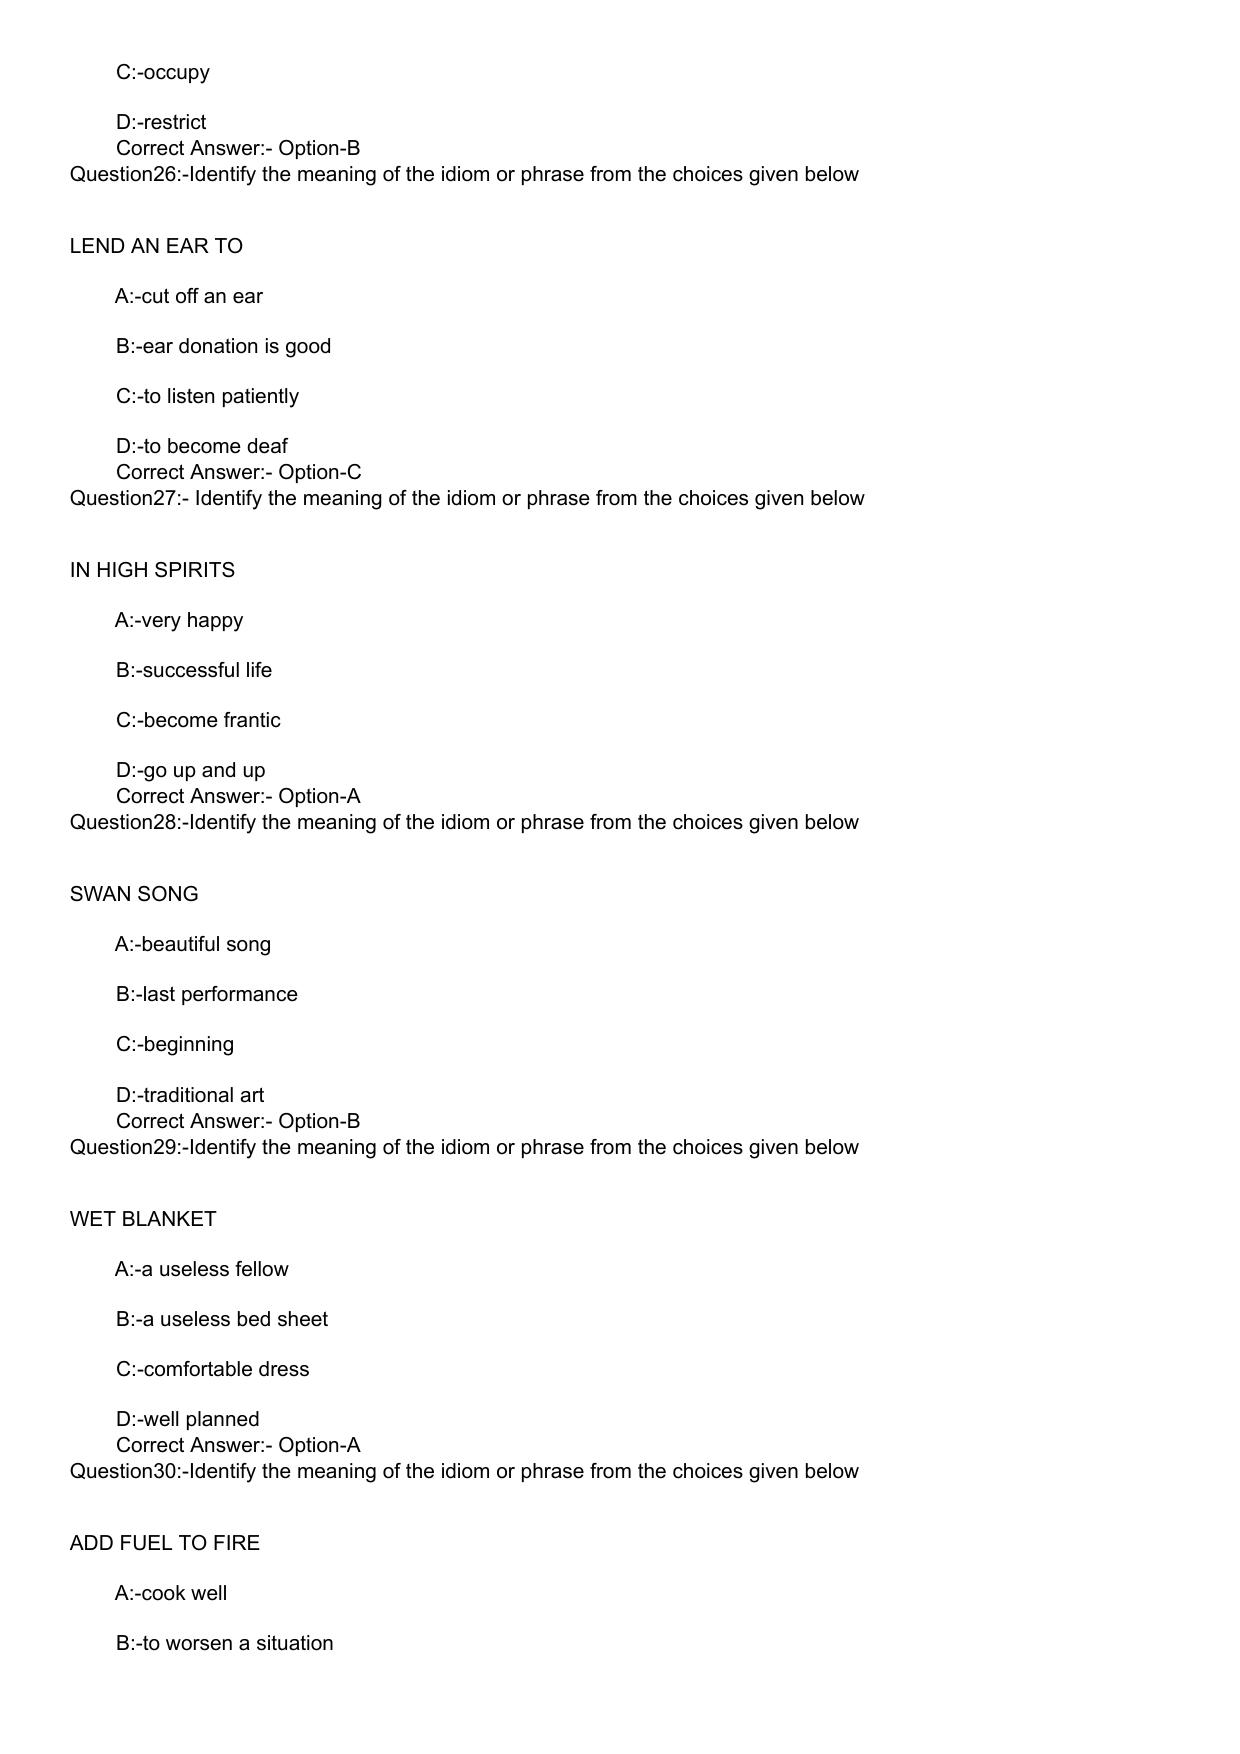 KLEE 5 Year LLB Exam 2020 Question Paper - Page 6